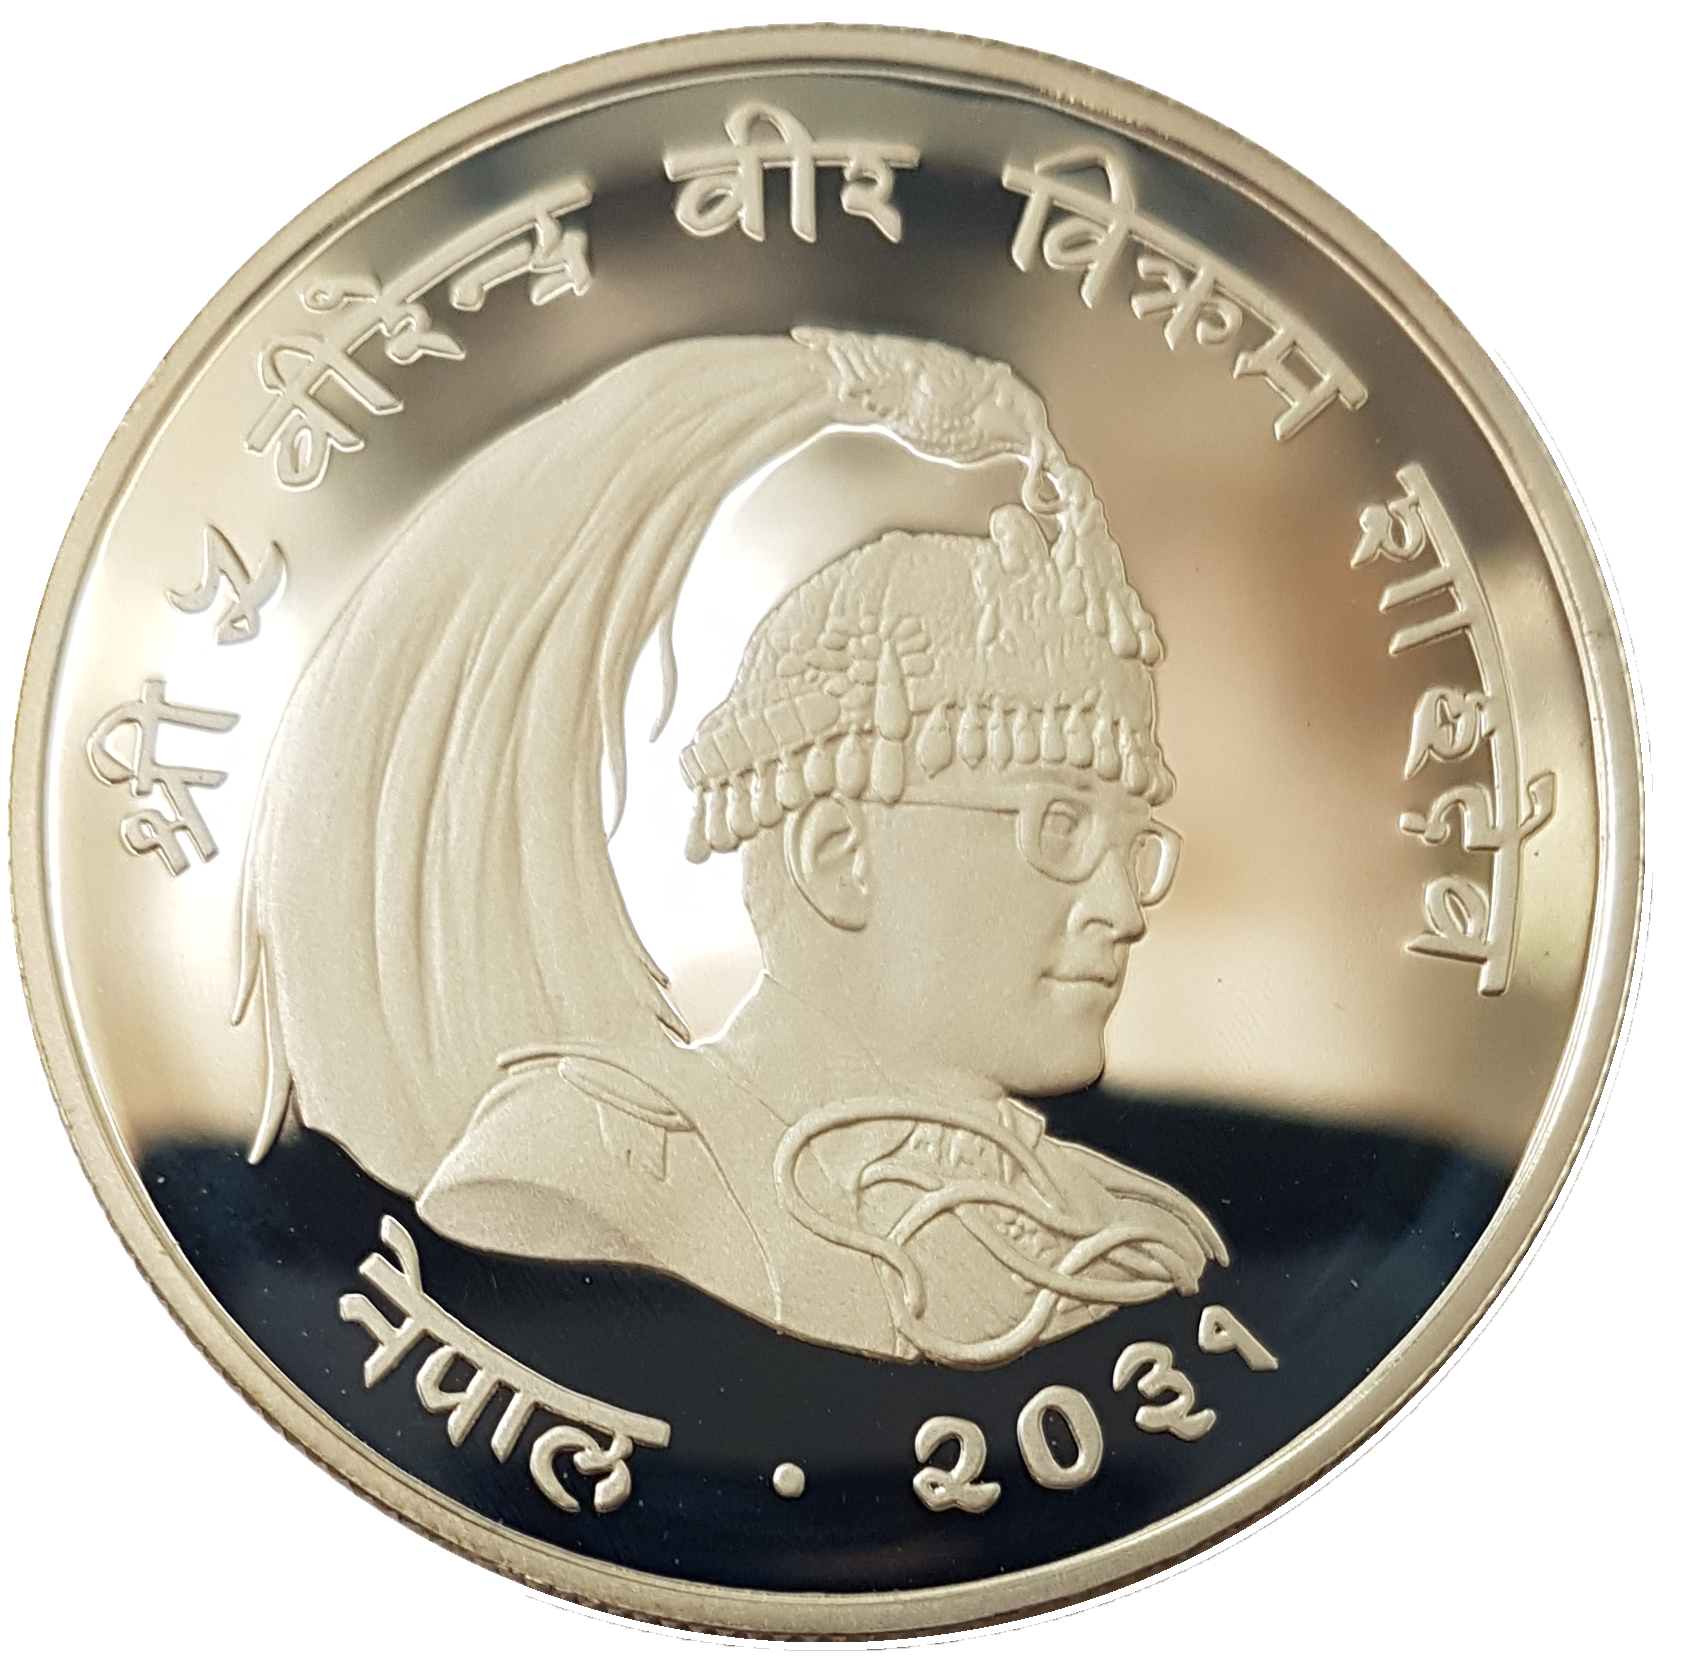 SALE／76%OFF】 1974 ROYAL MINT 25 RUPEE SILVER agapeeurope.org